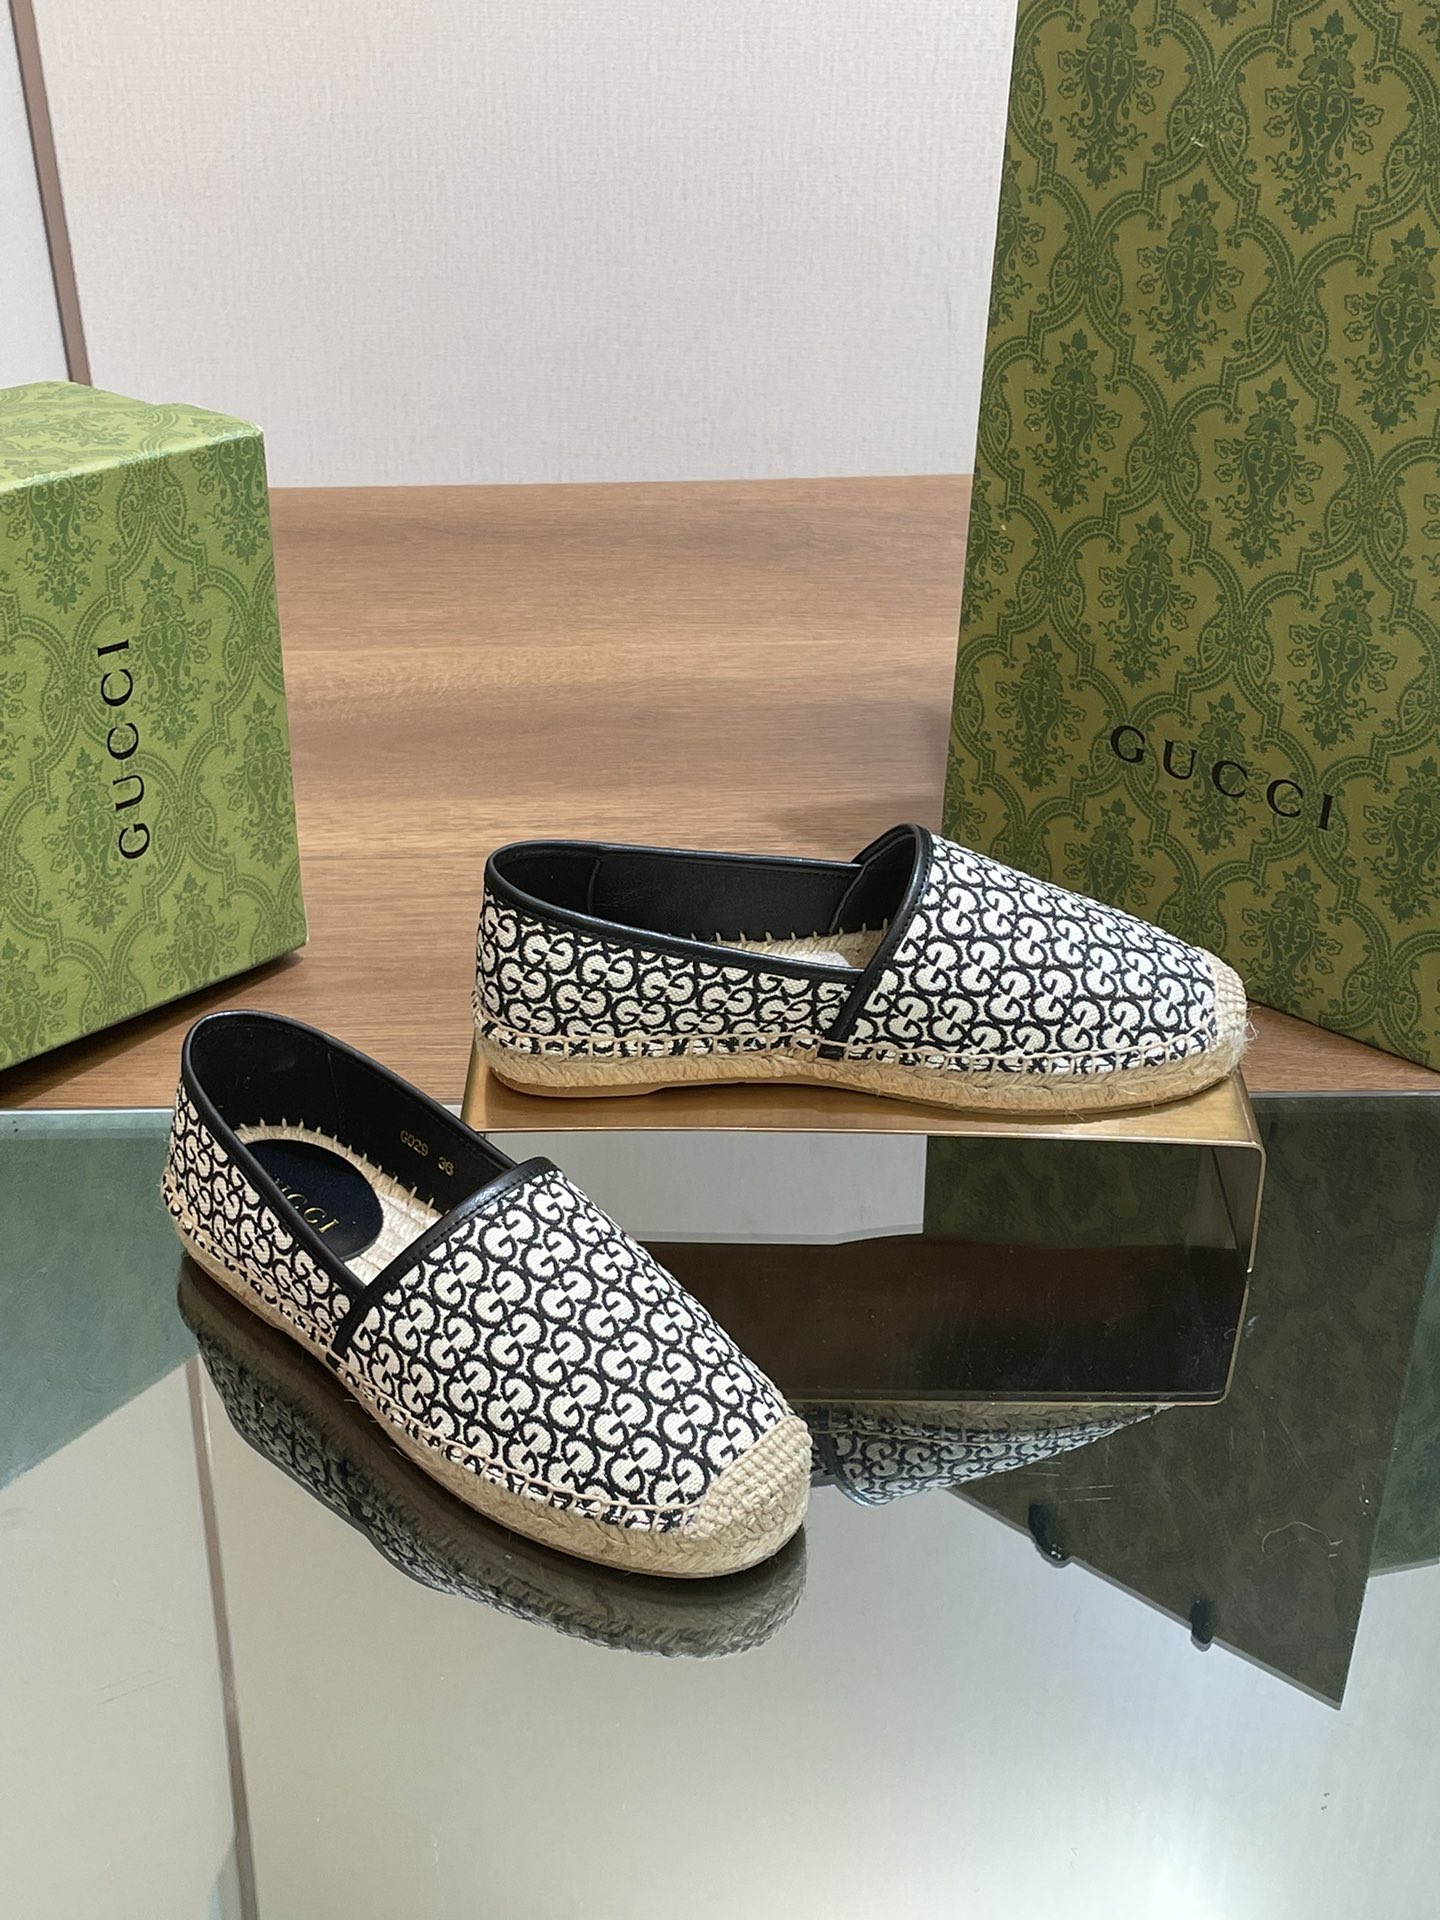 Replica AAA+ Designer
 Gucci Espadrilles Single Layer Shoes Printing Women Canvas Hemp Rope Rubber Straw Woven Fashion